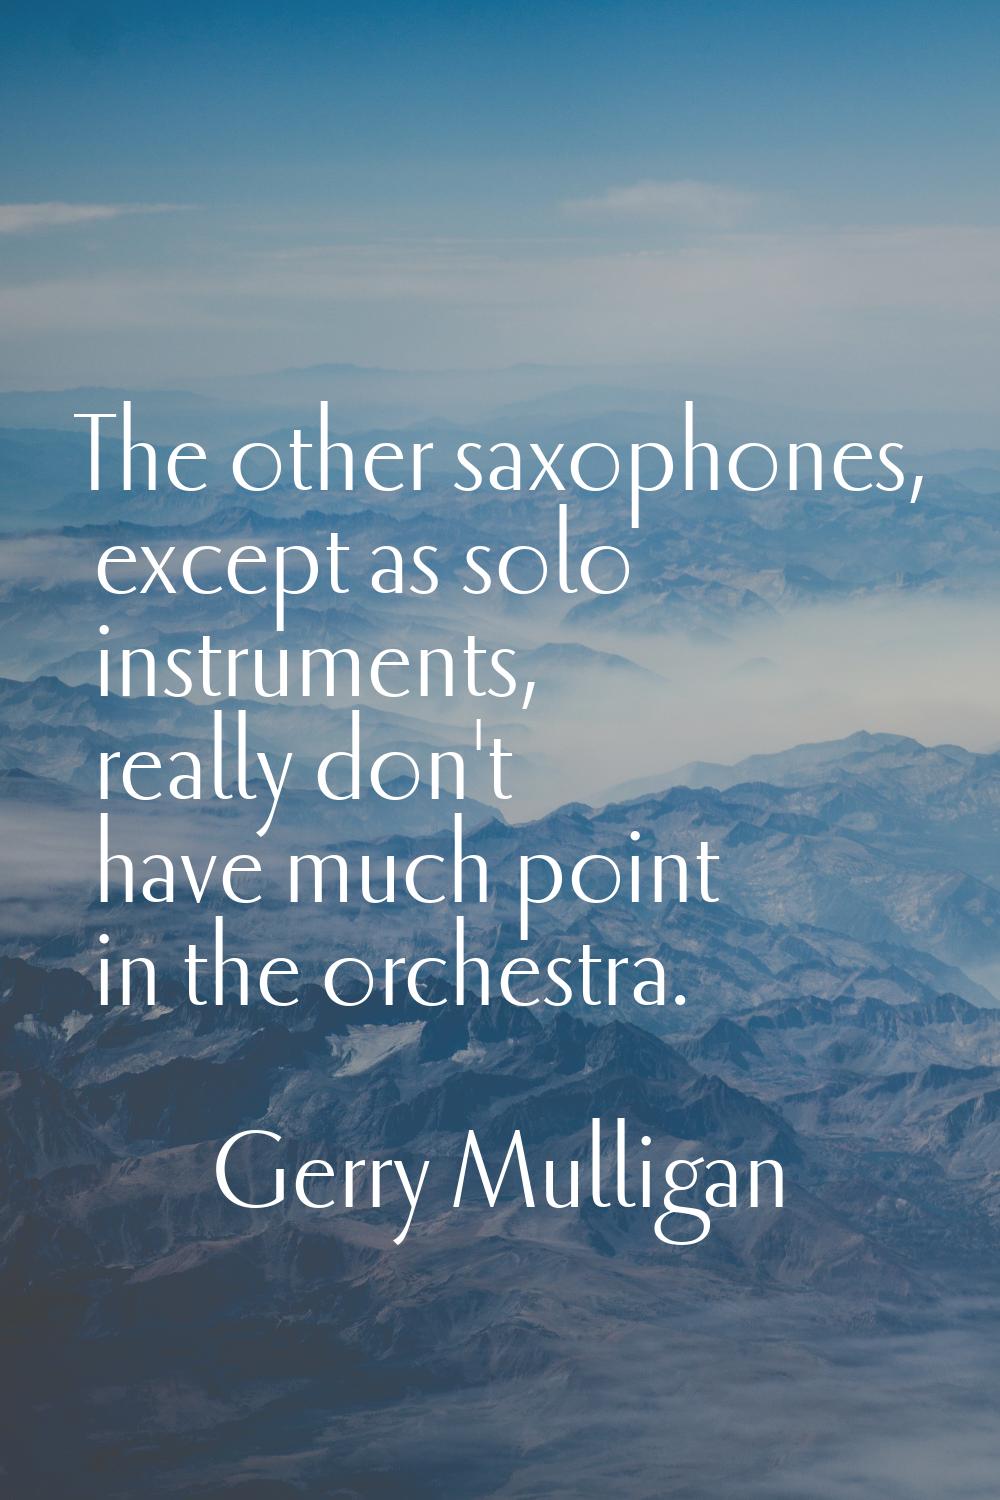 The other saxophones, except as solo instruments, really don't have much point in the orchestra.